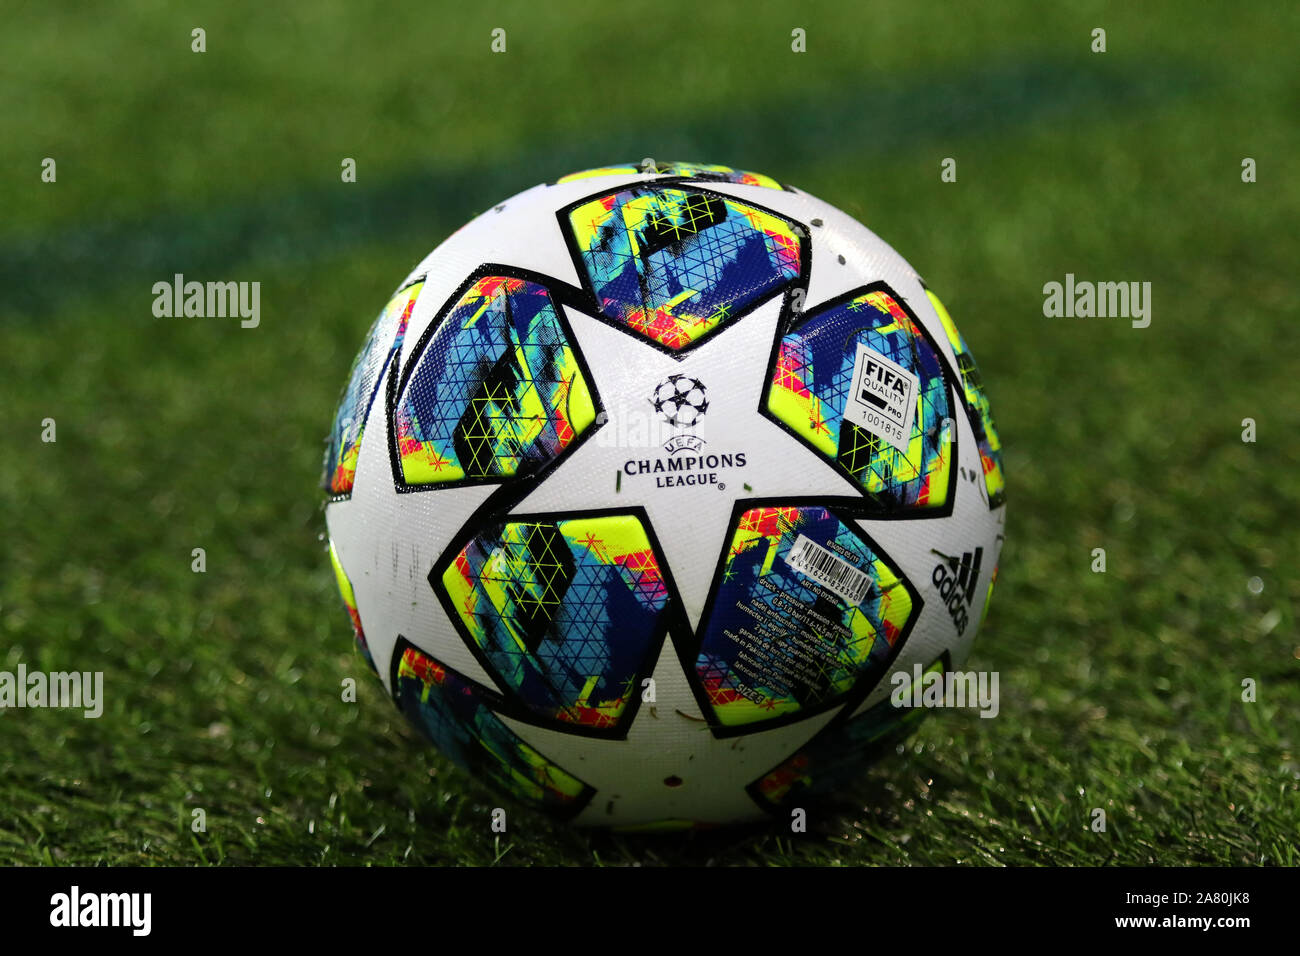 Prague Czechia October 23 2019 Official Uefa Champions League Match Ball On The Grass During The Uefa Champions League Game Between Barcelona And Slavia Praha At Eden Arena In Prague Stock Photo Alamy